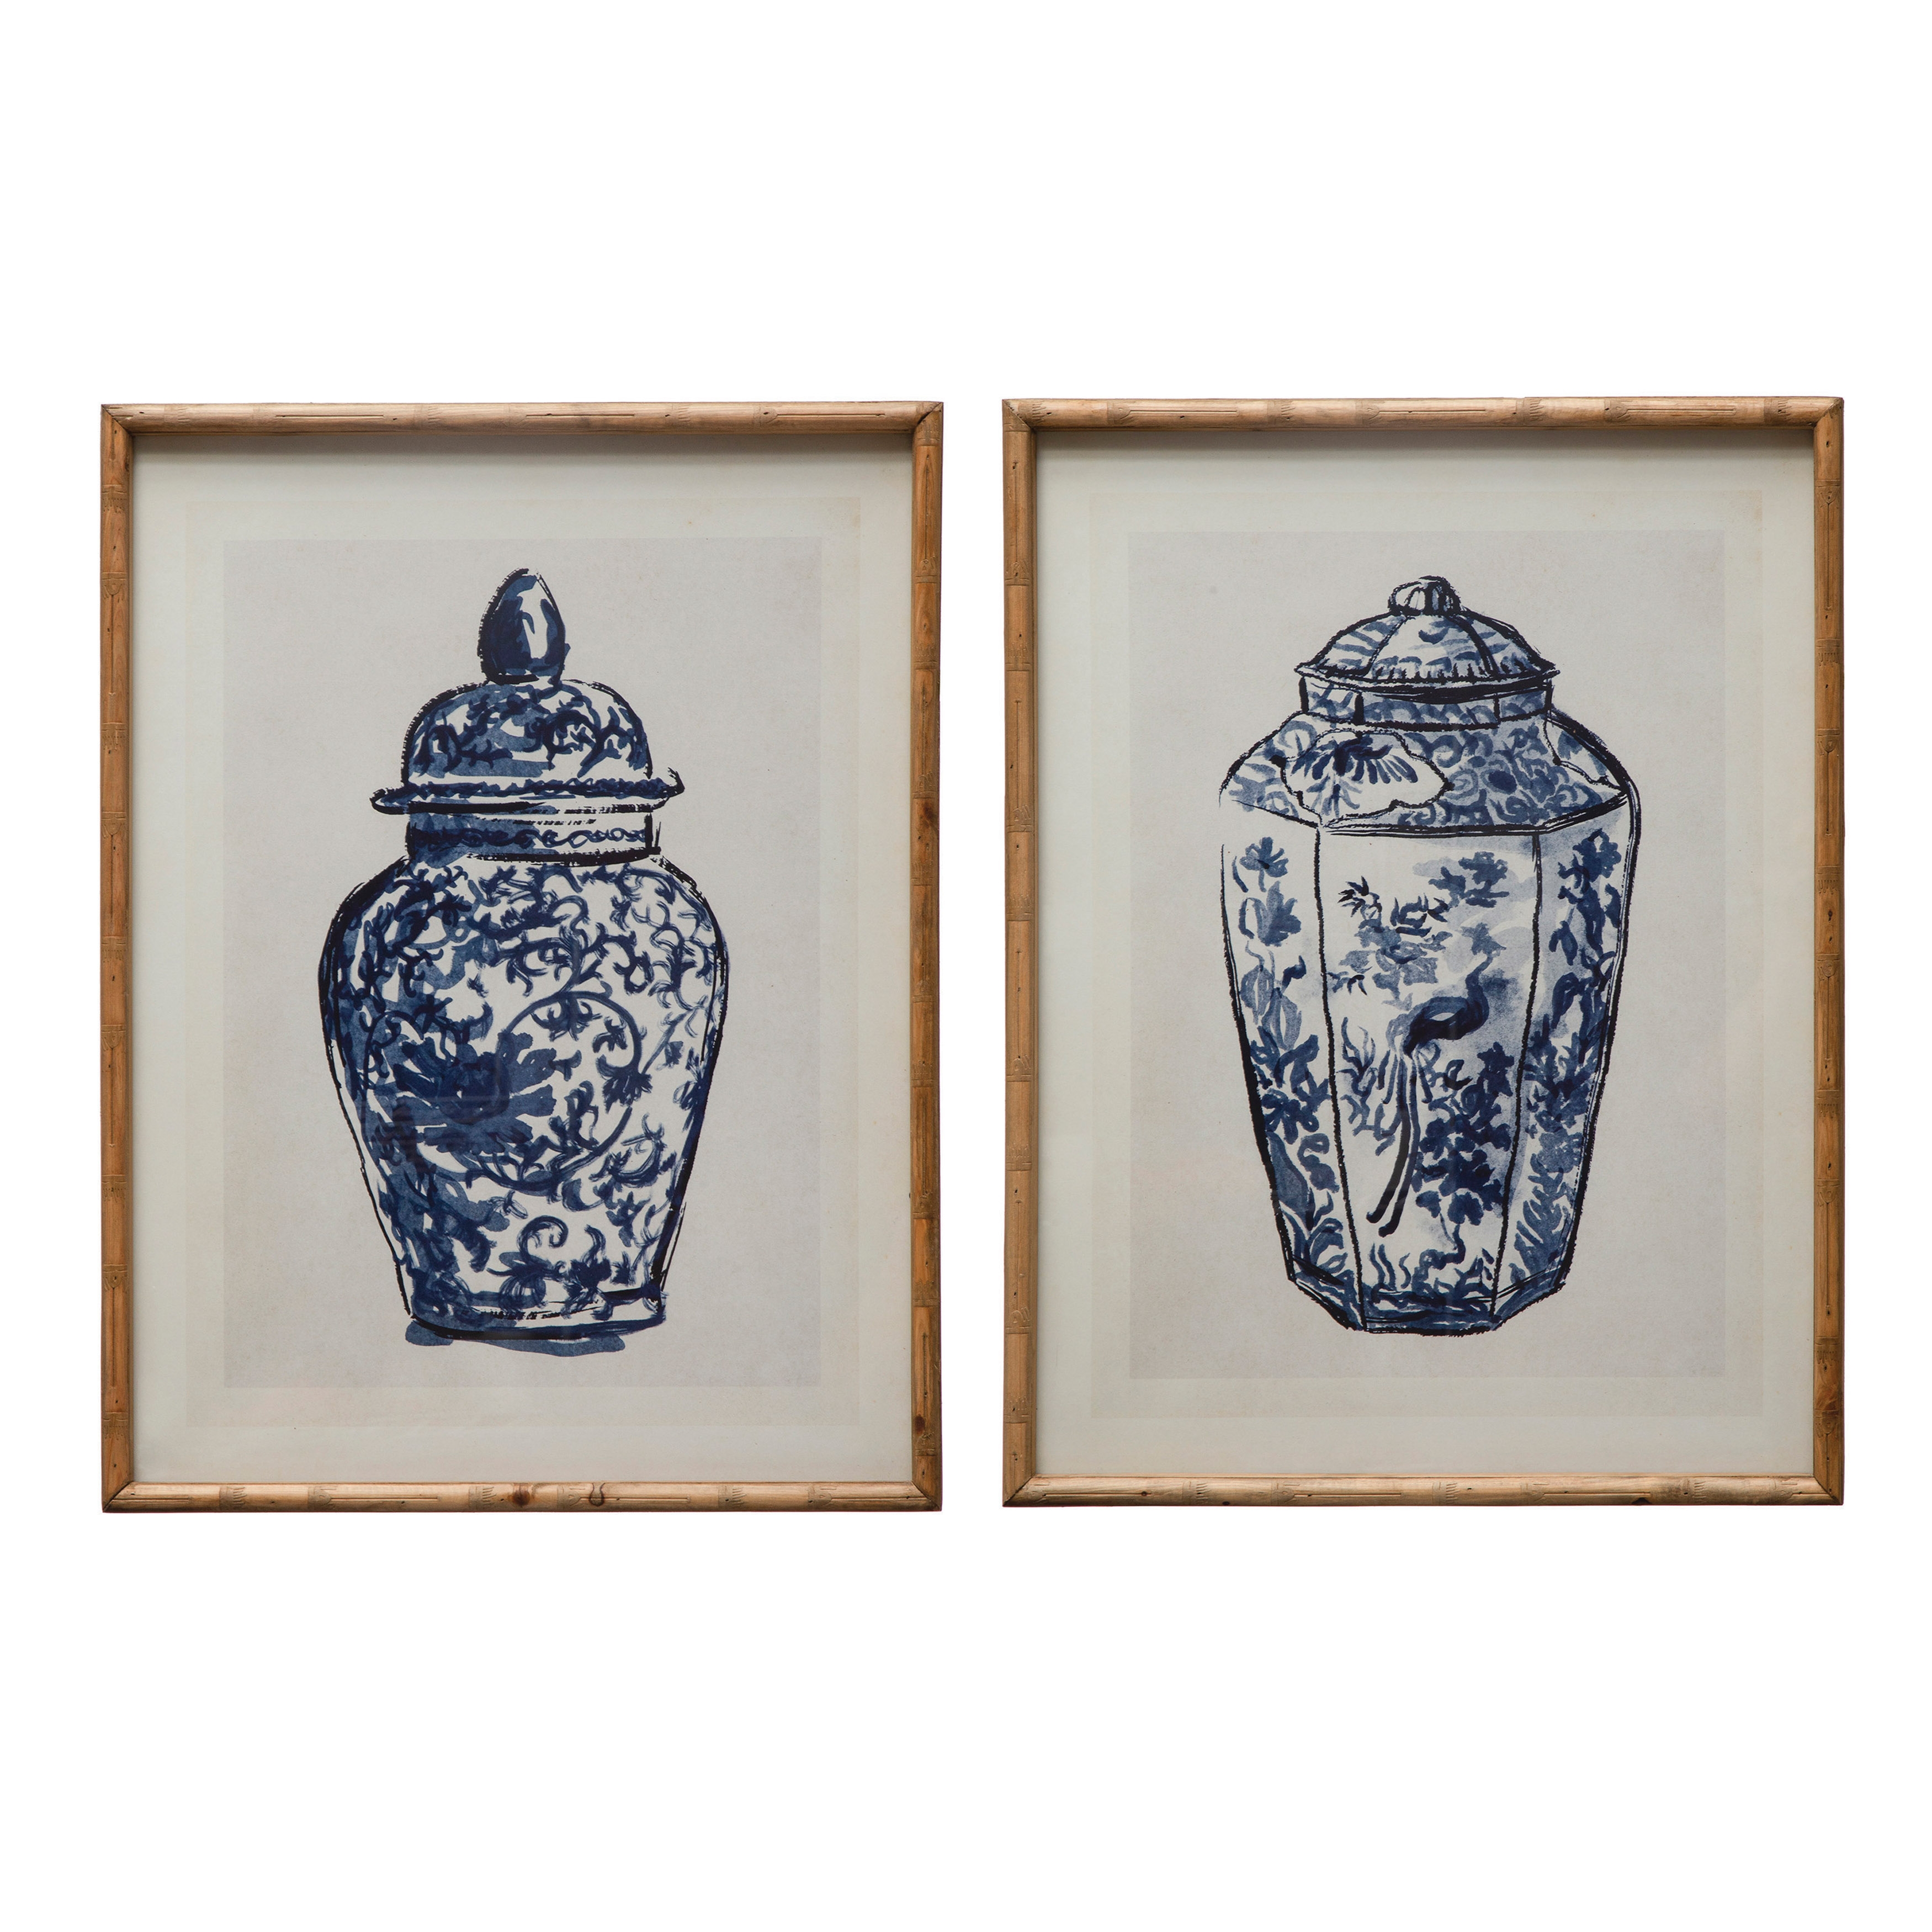 Wood Framed Ginger Jar Wall Art with Glass Cover, Multicolor, Set of 2 - Image 0